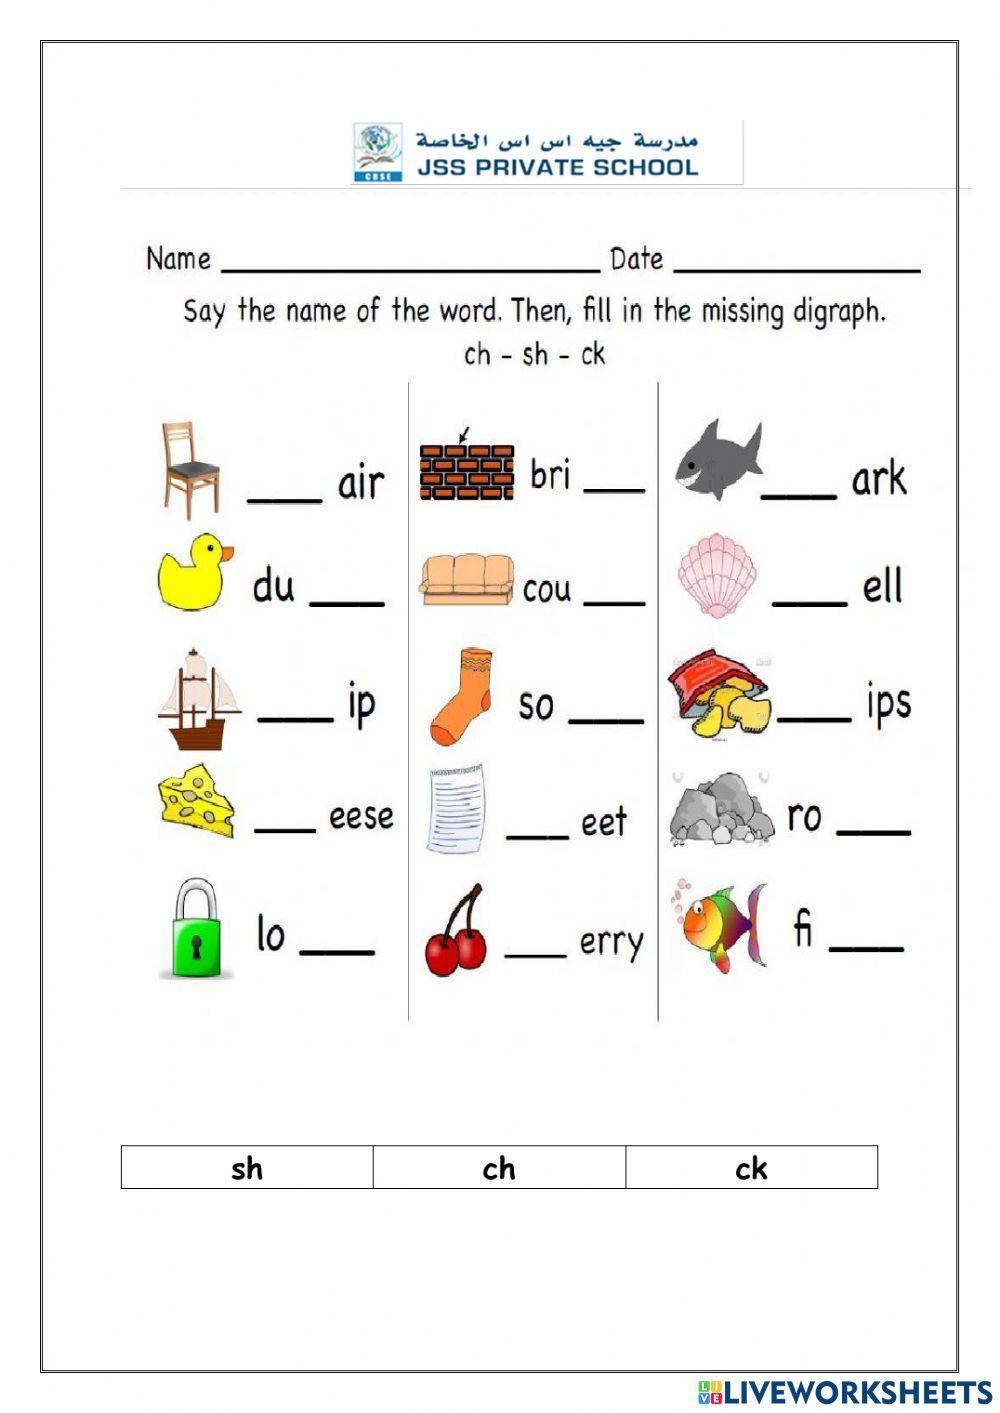 Sh ch and ck Digraphs